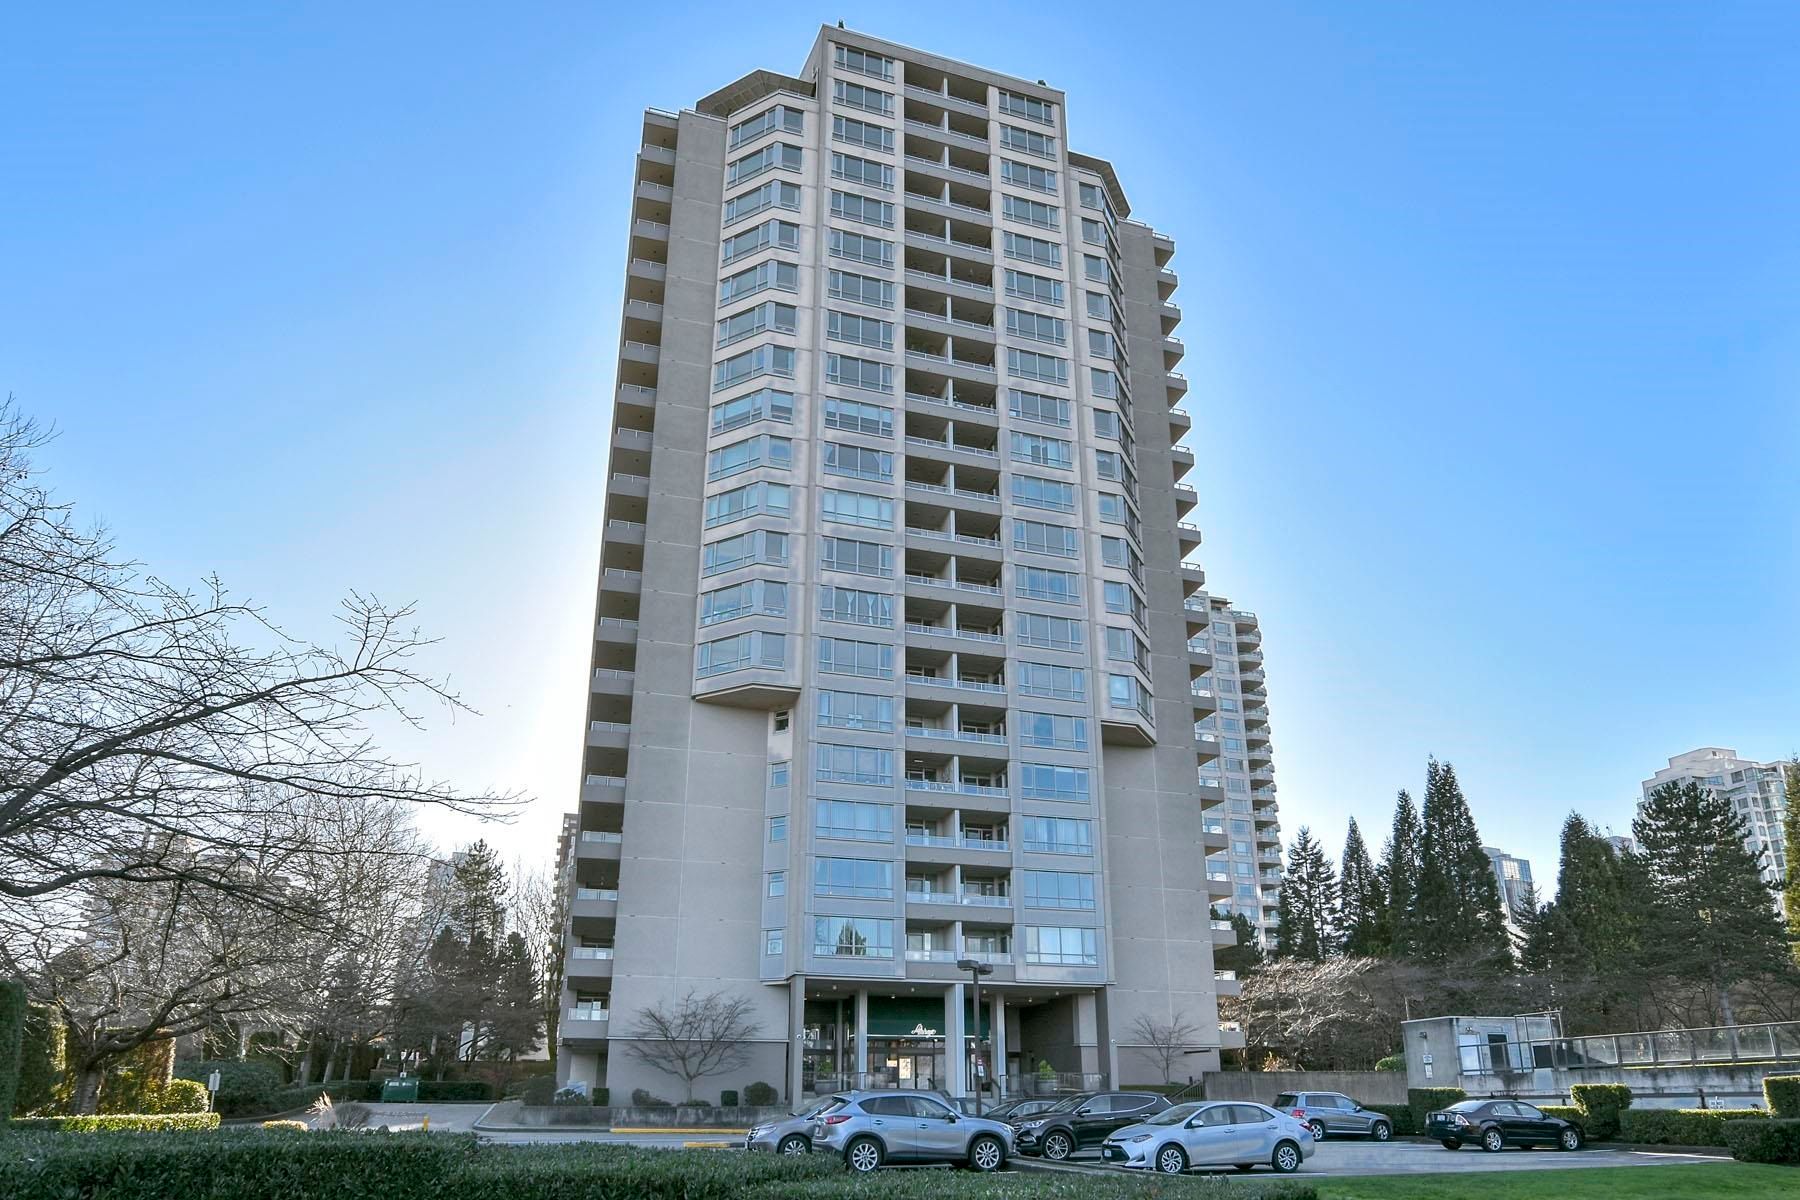 Property Sold by Our Office at 2203 6055 NELSON AVE in Burnaby